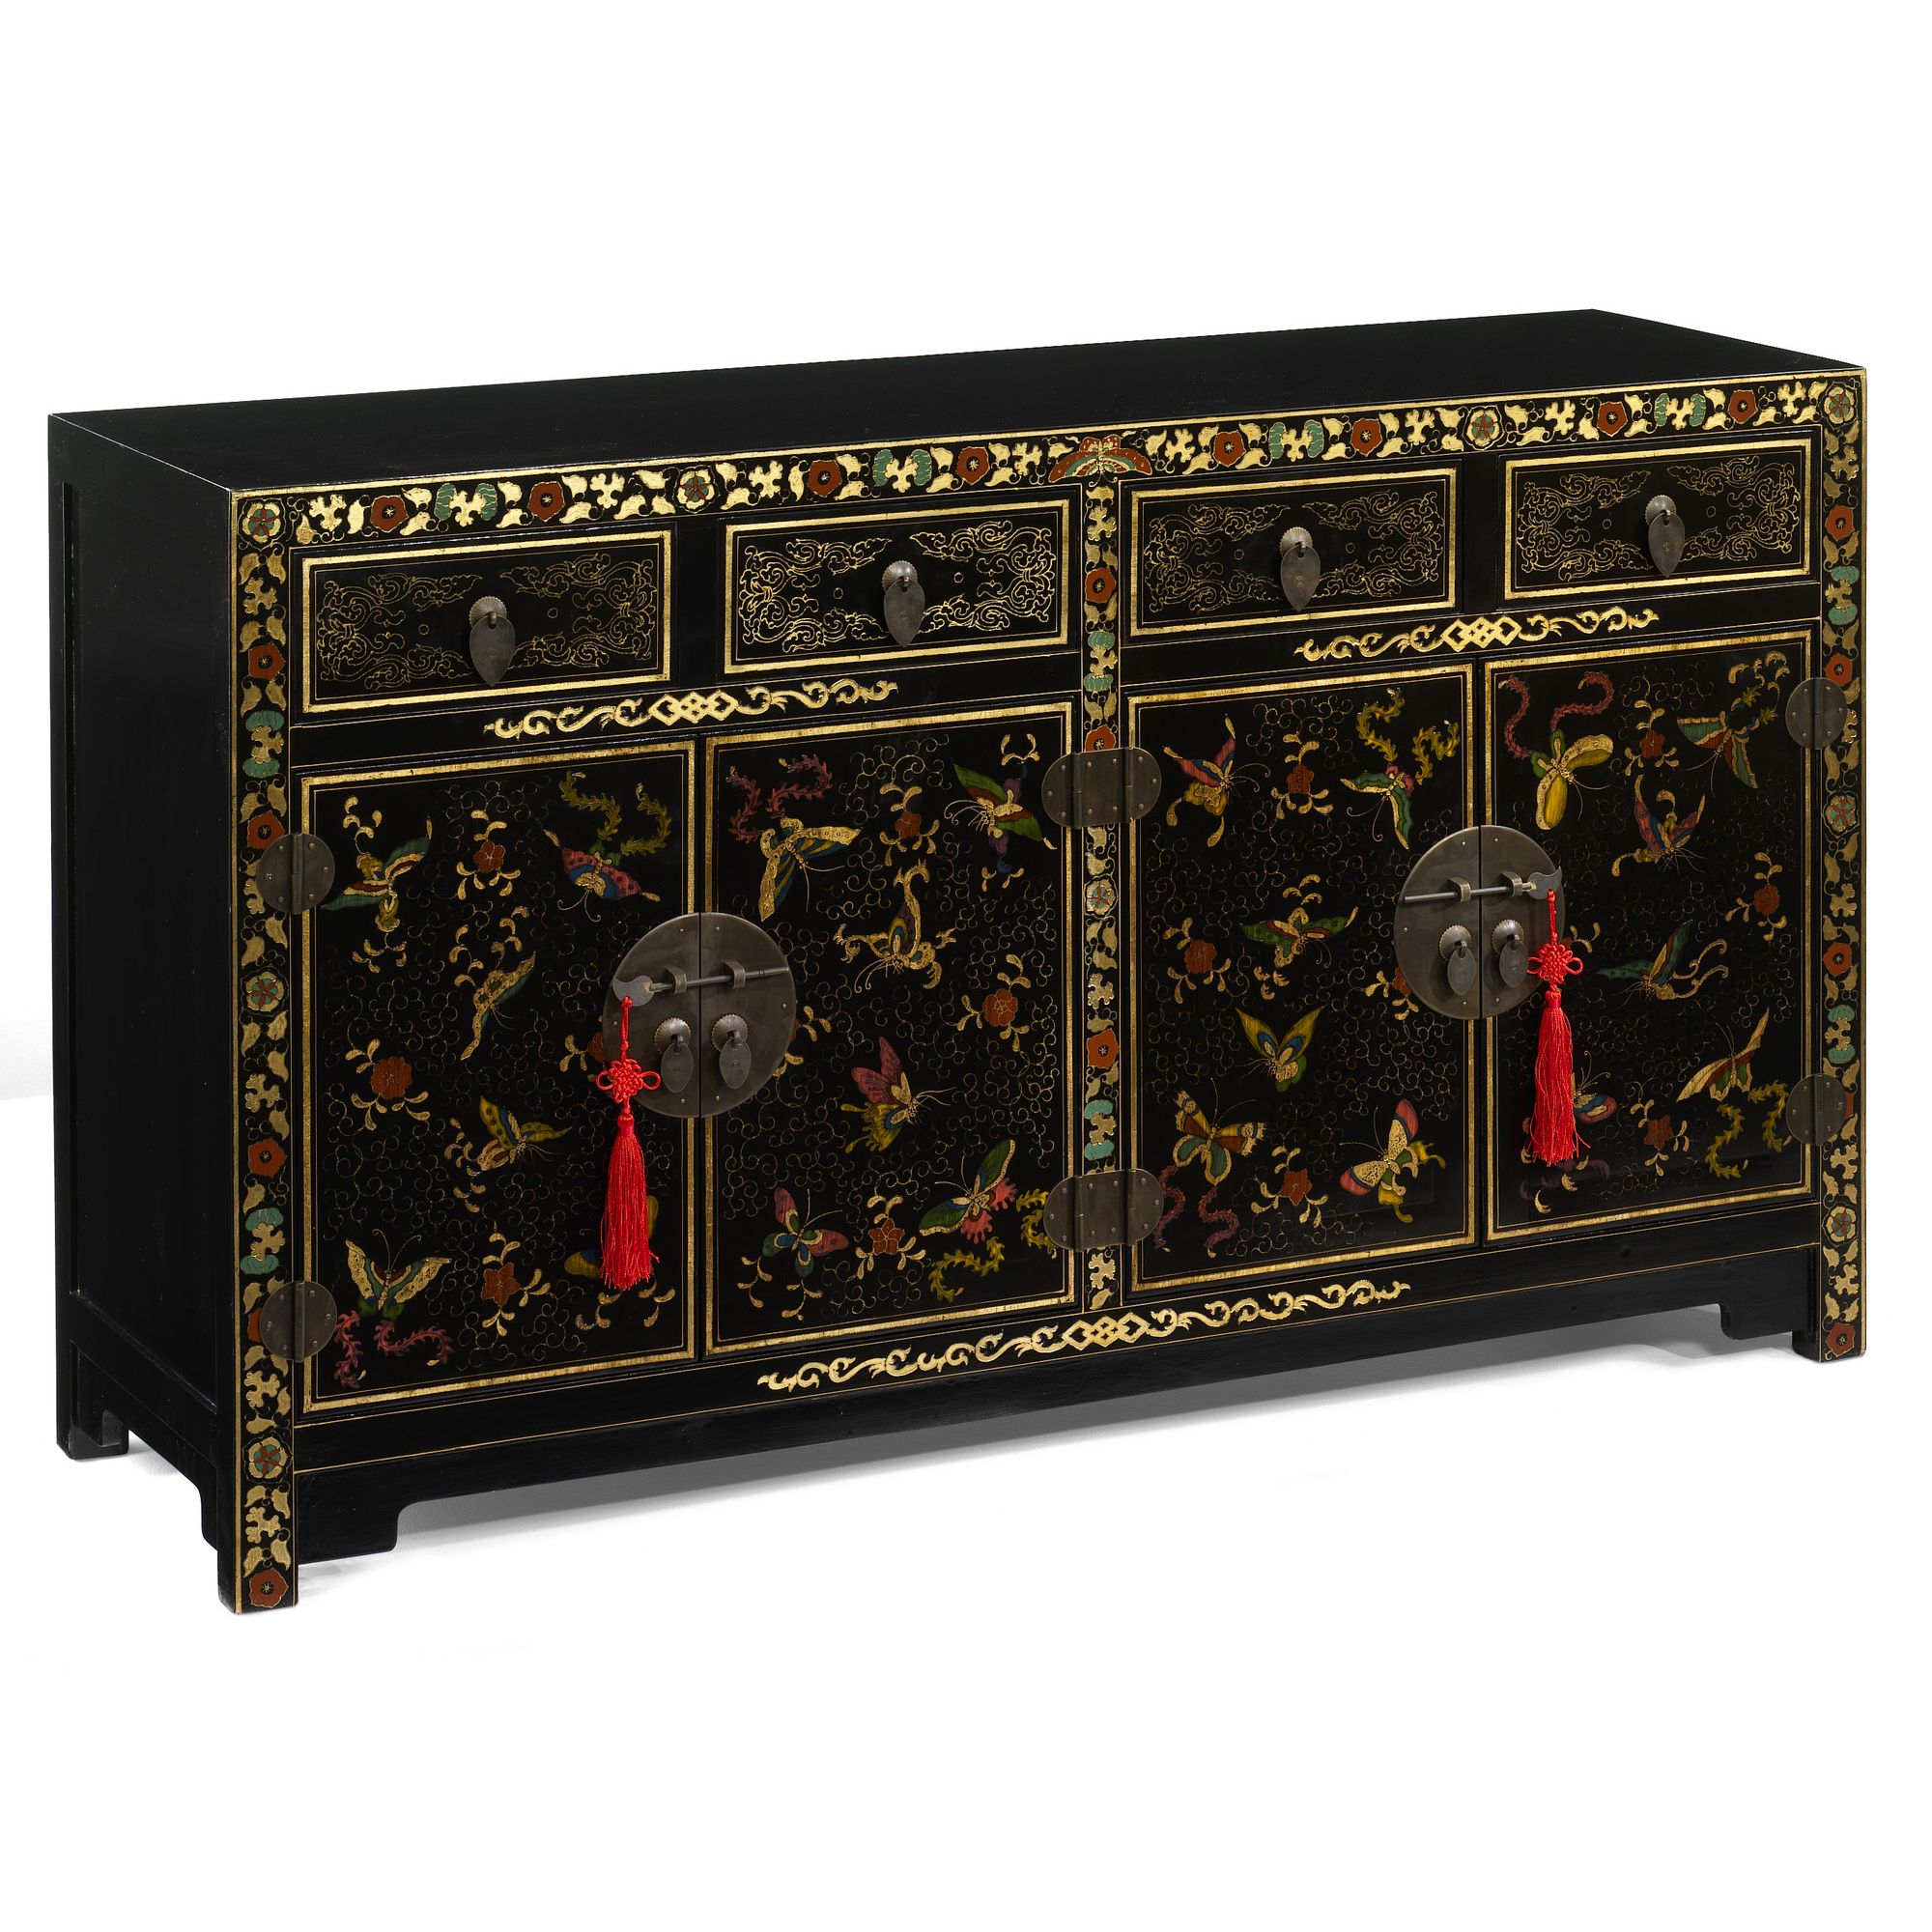 Shimu Chinese Classical Shanxi Butterfly Sideboard - Black Lacquer at Tesco Direct